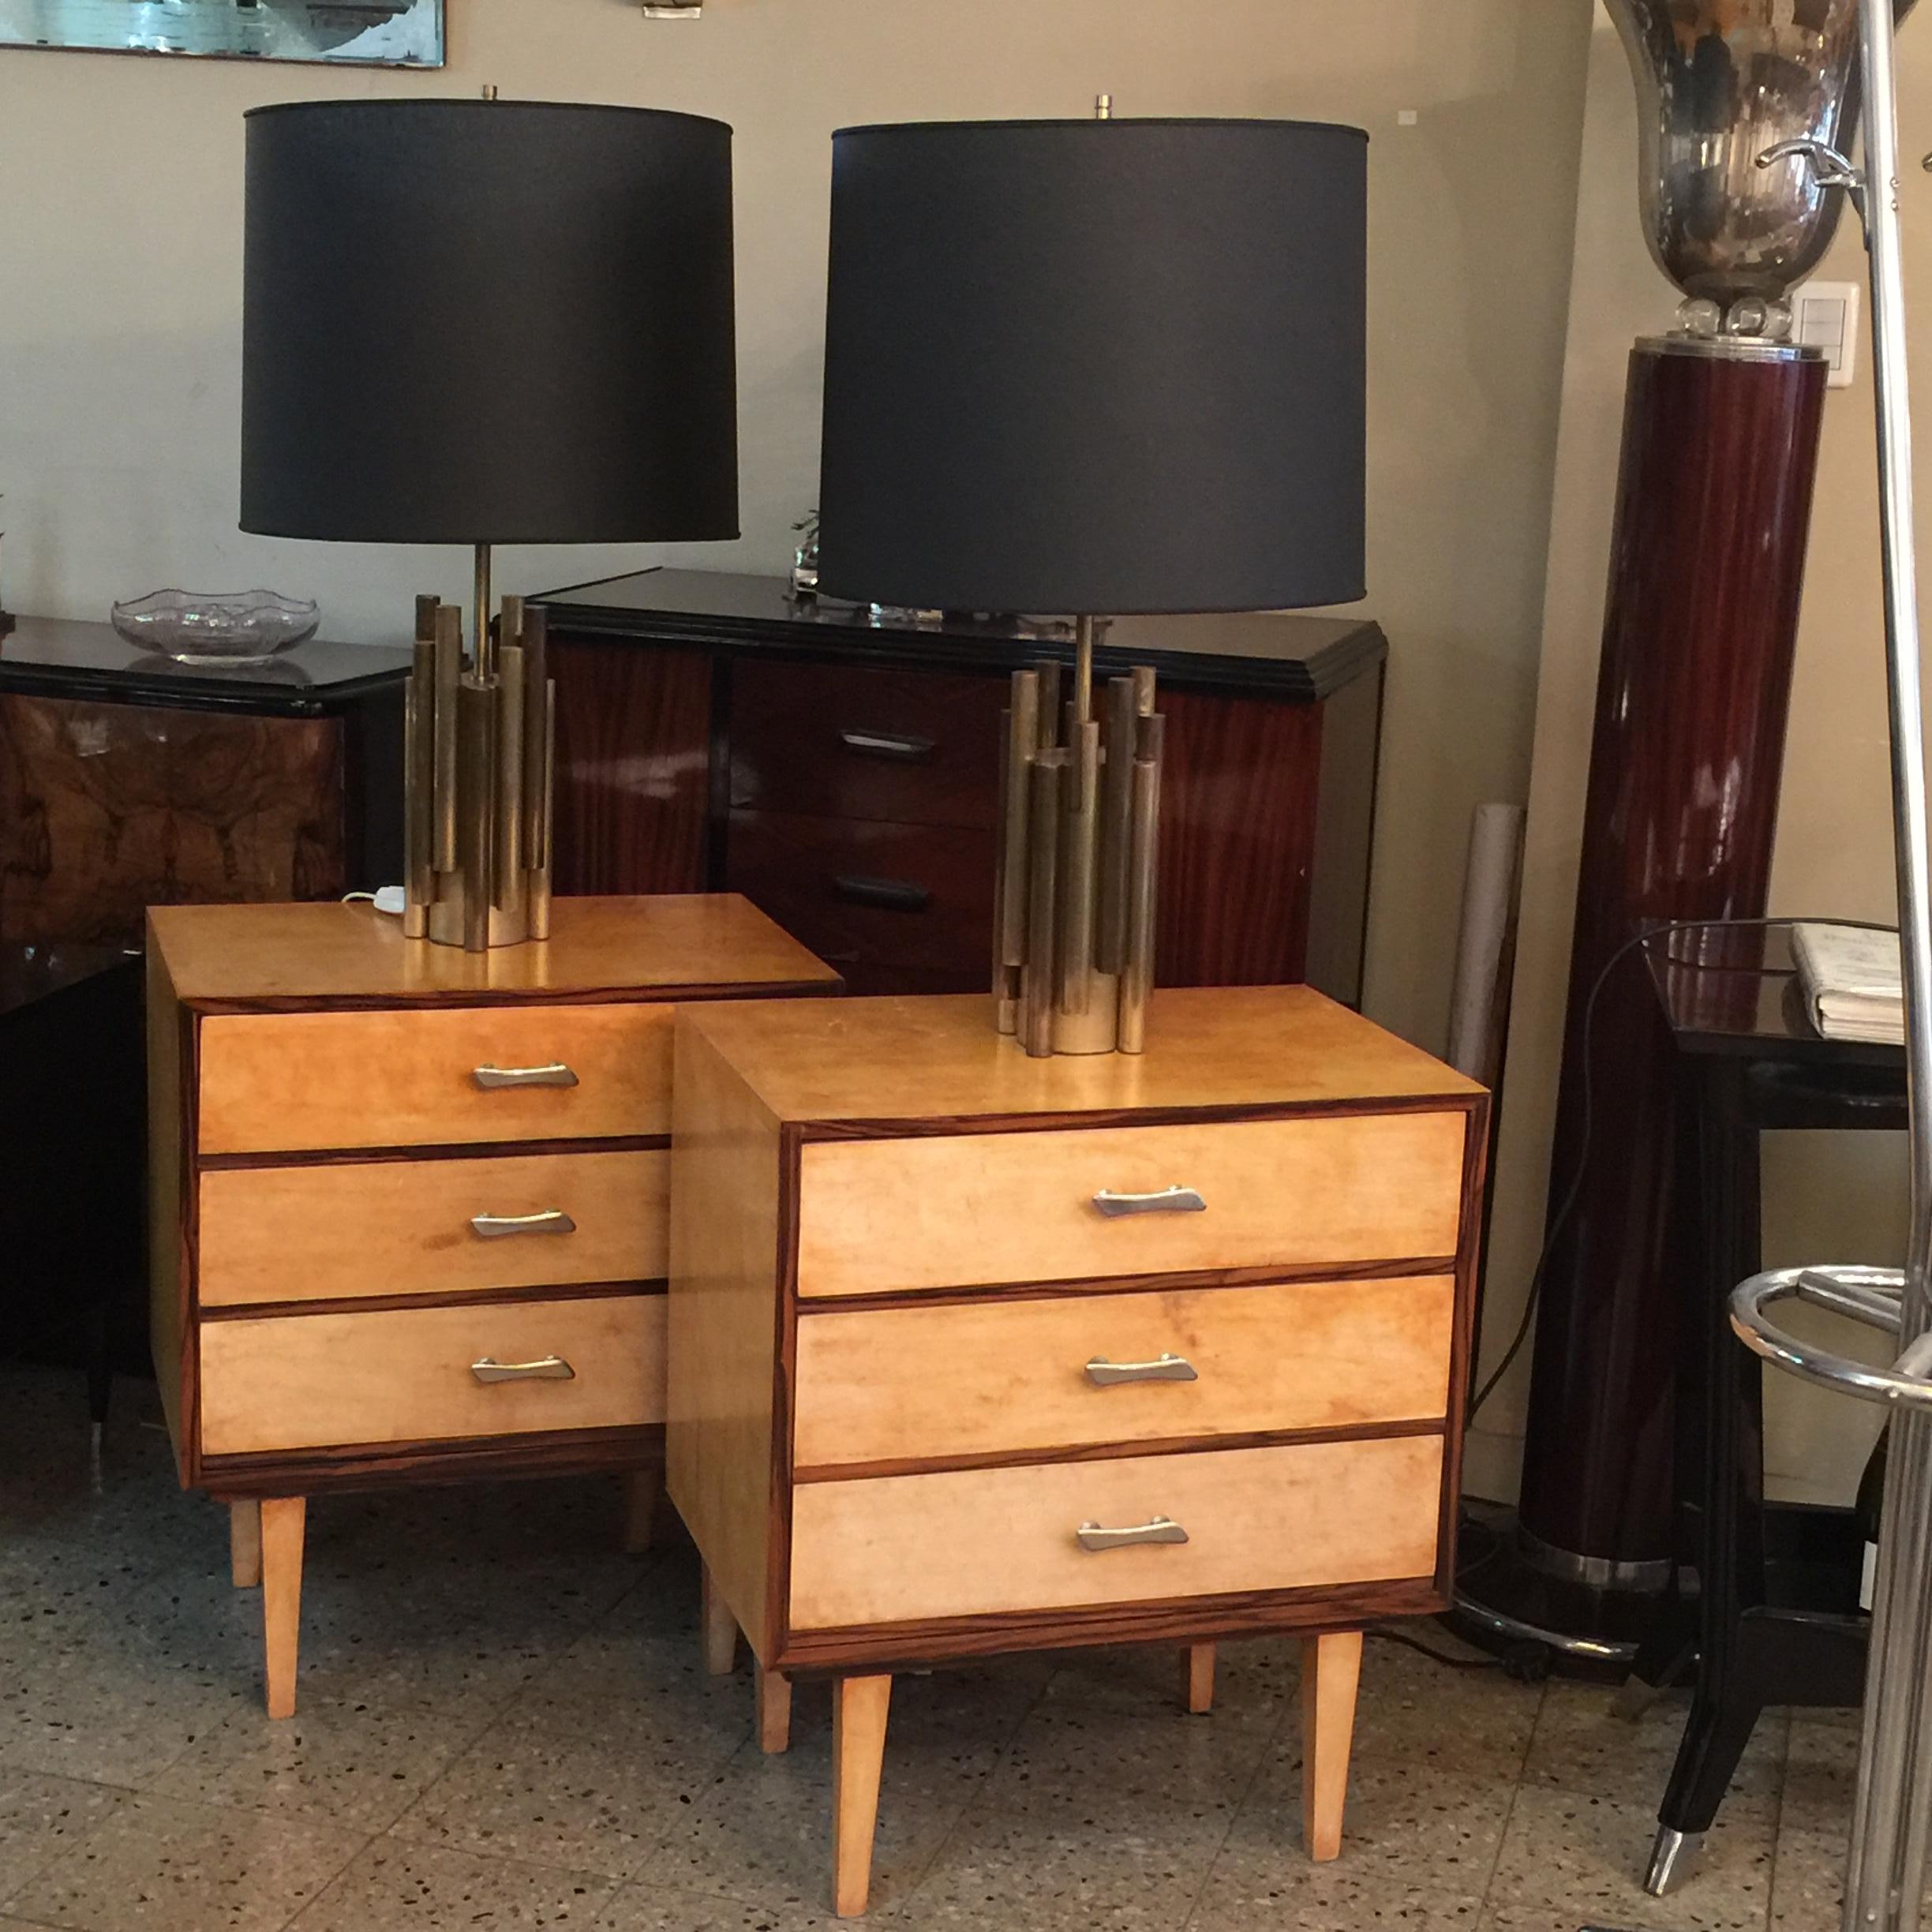 Space Age 2 Night Stands in 'Parchament Leather', and Wood, 1957, American For Sale